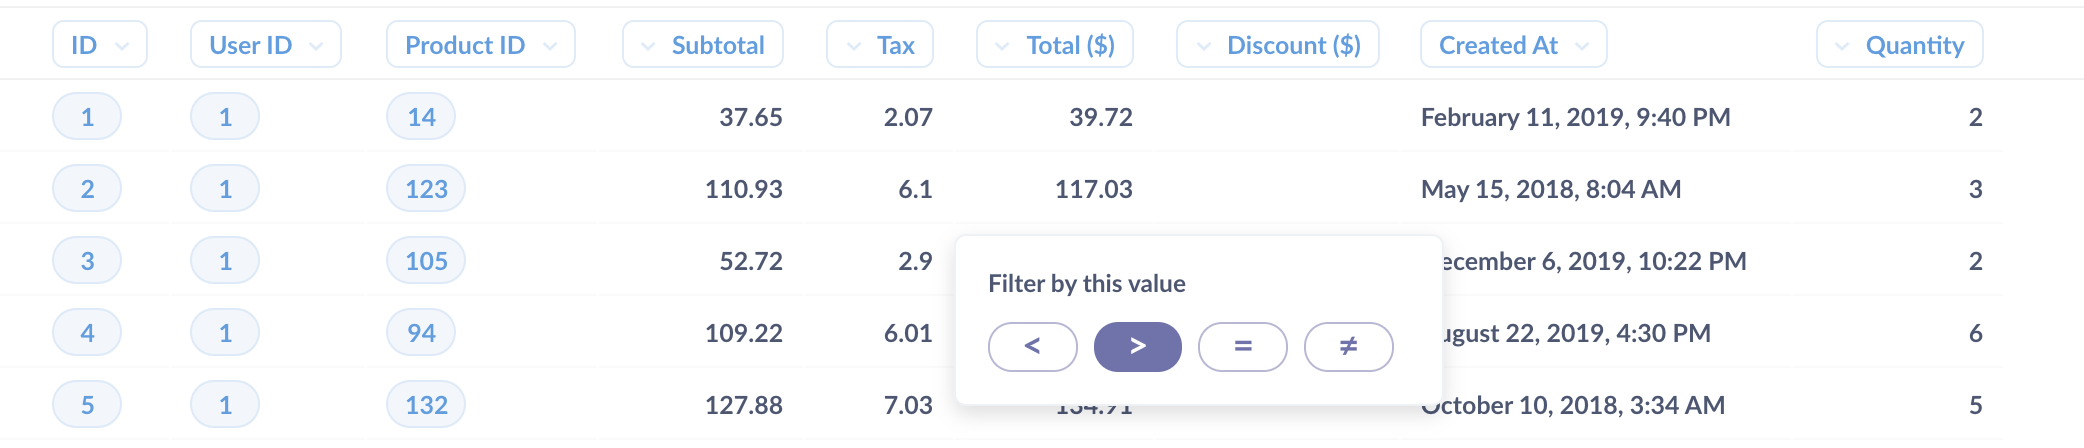 Clicking on a scalar value will present options for filtering the table by that value.